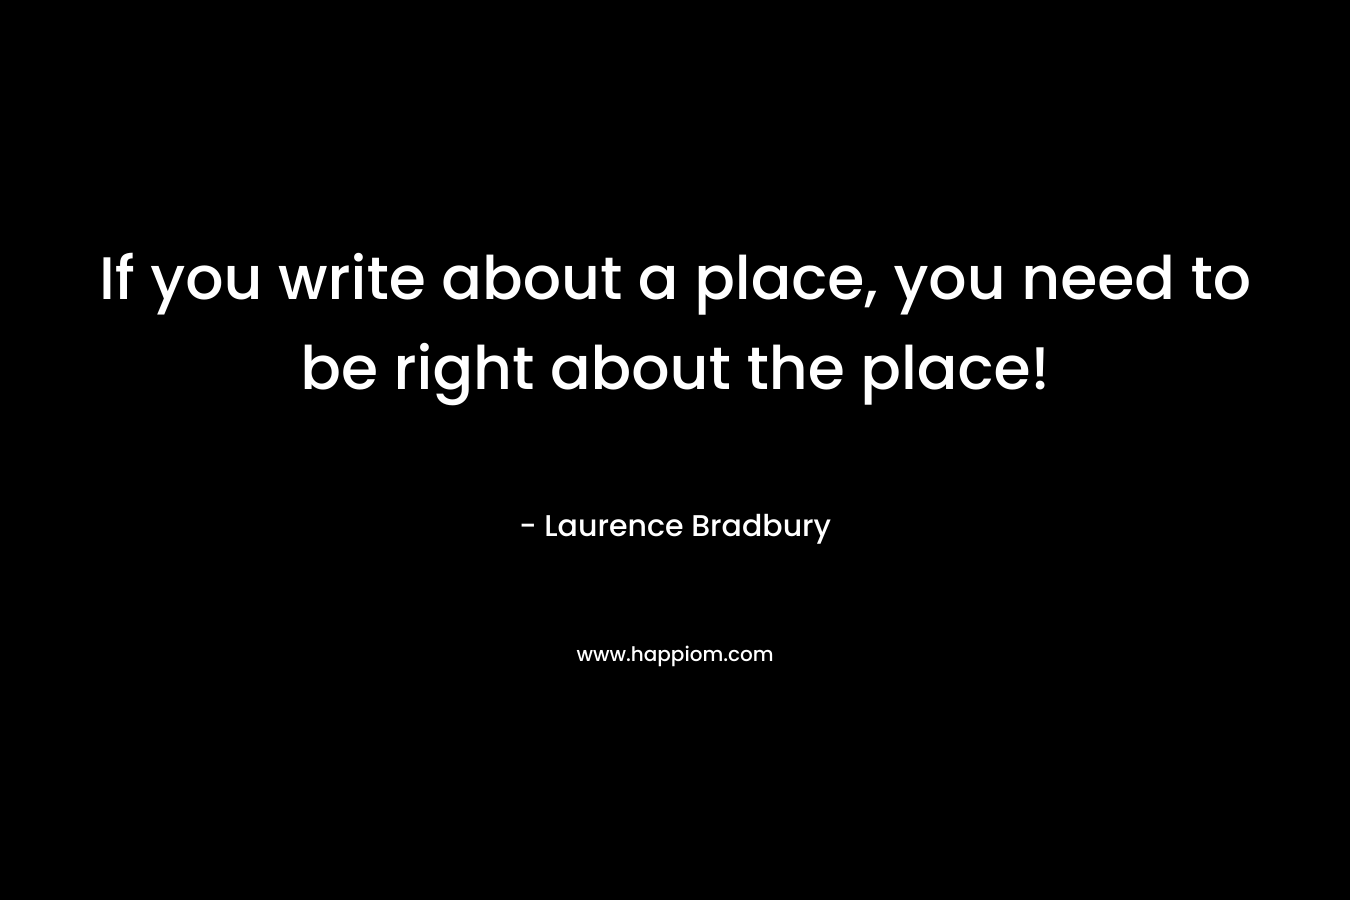 If you write about a place, you need to be right about the place! – Laurence Bradbury